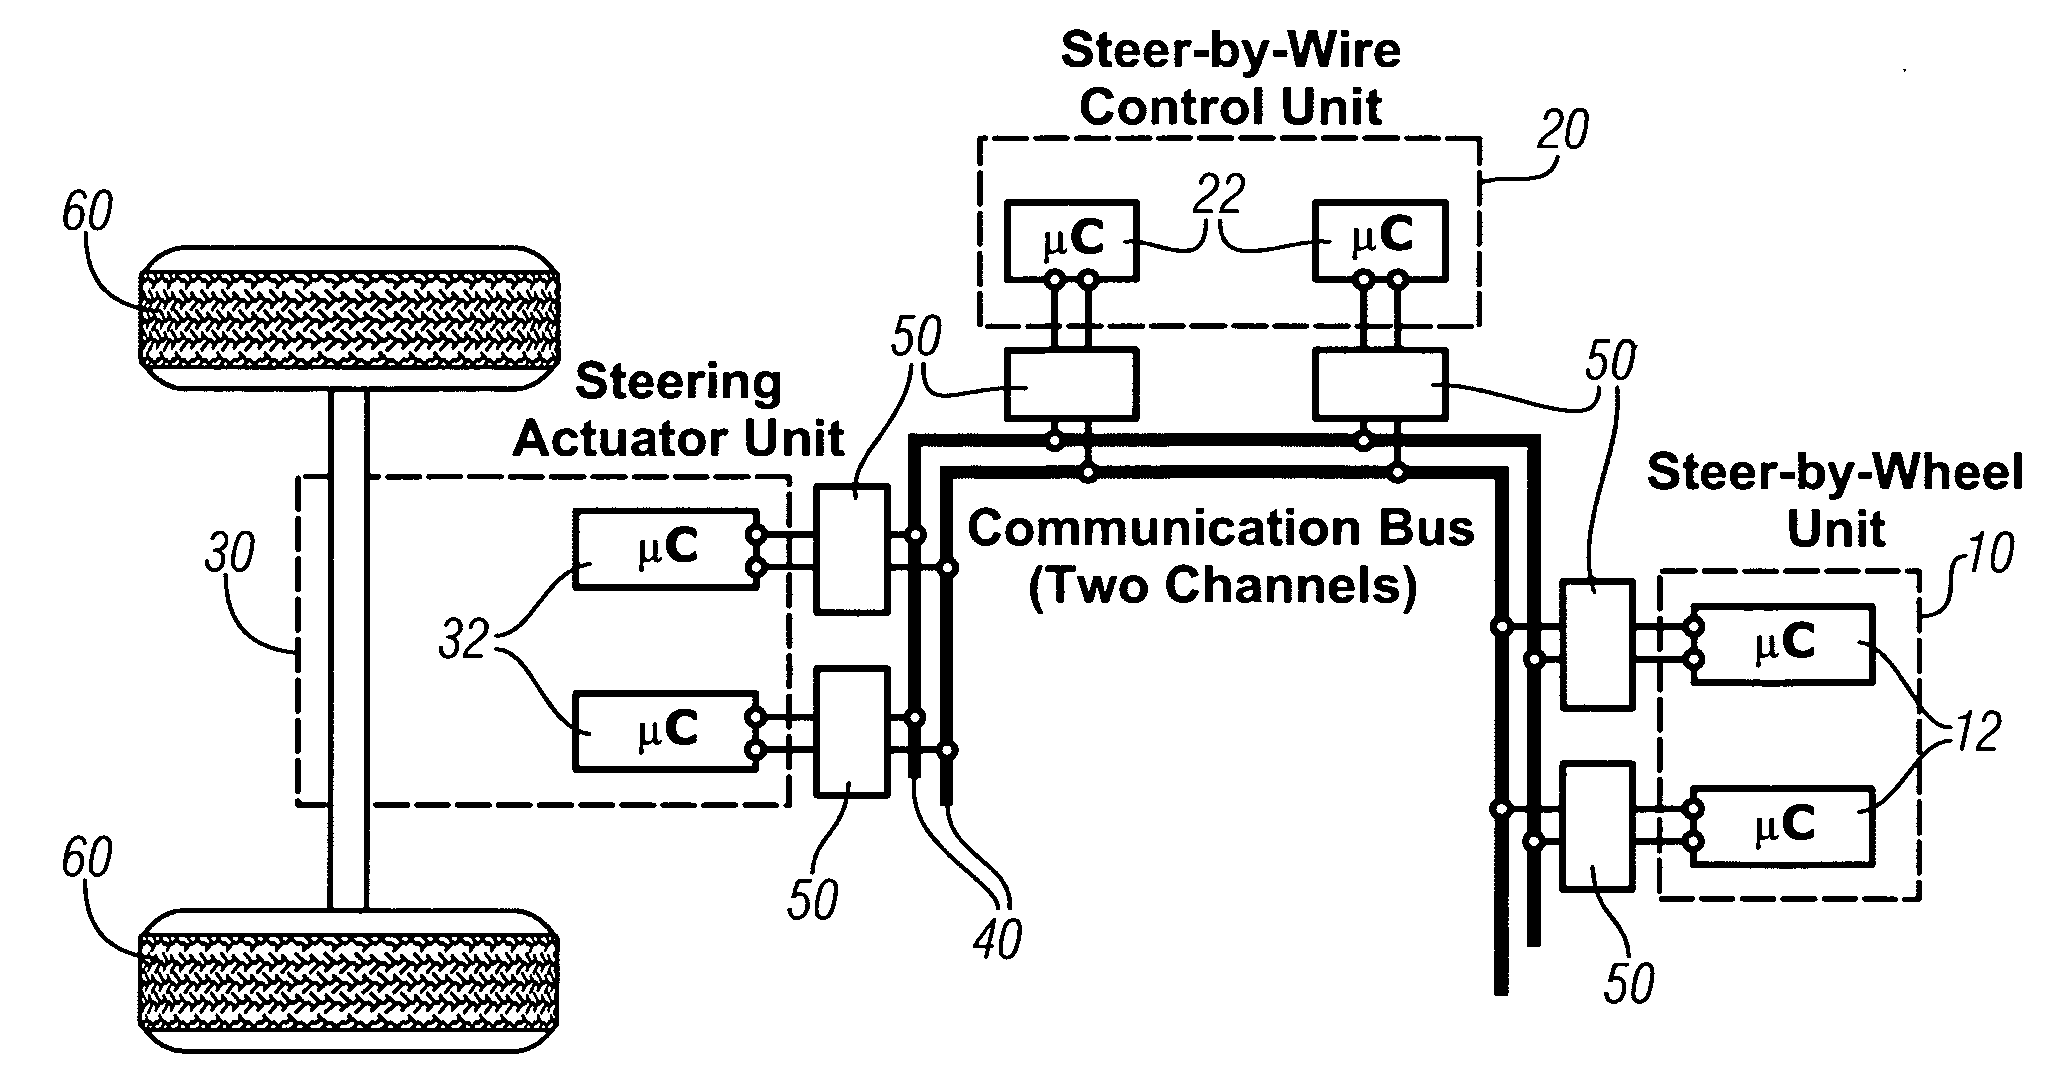 Fault-tolerant architecture for a distributed control system